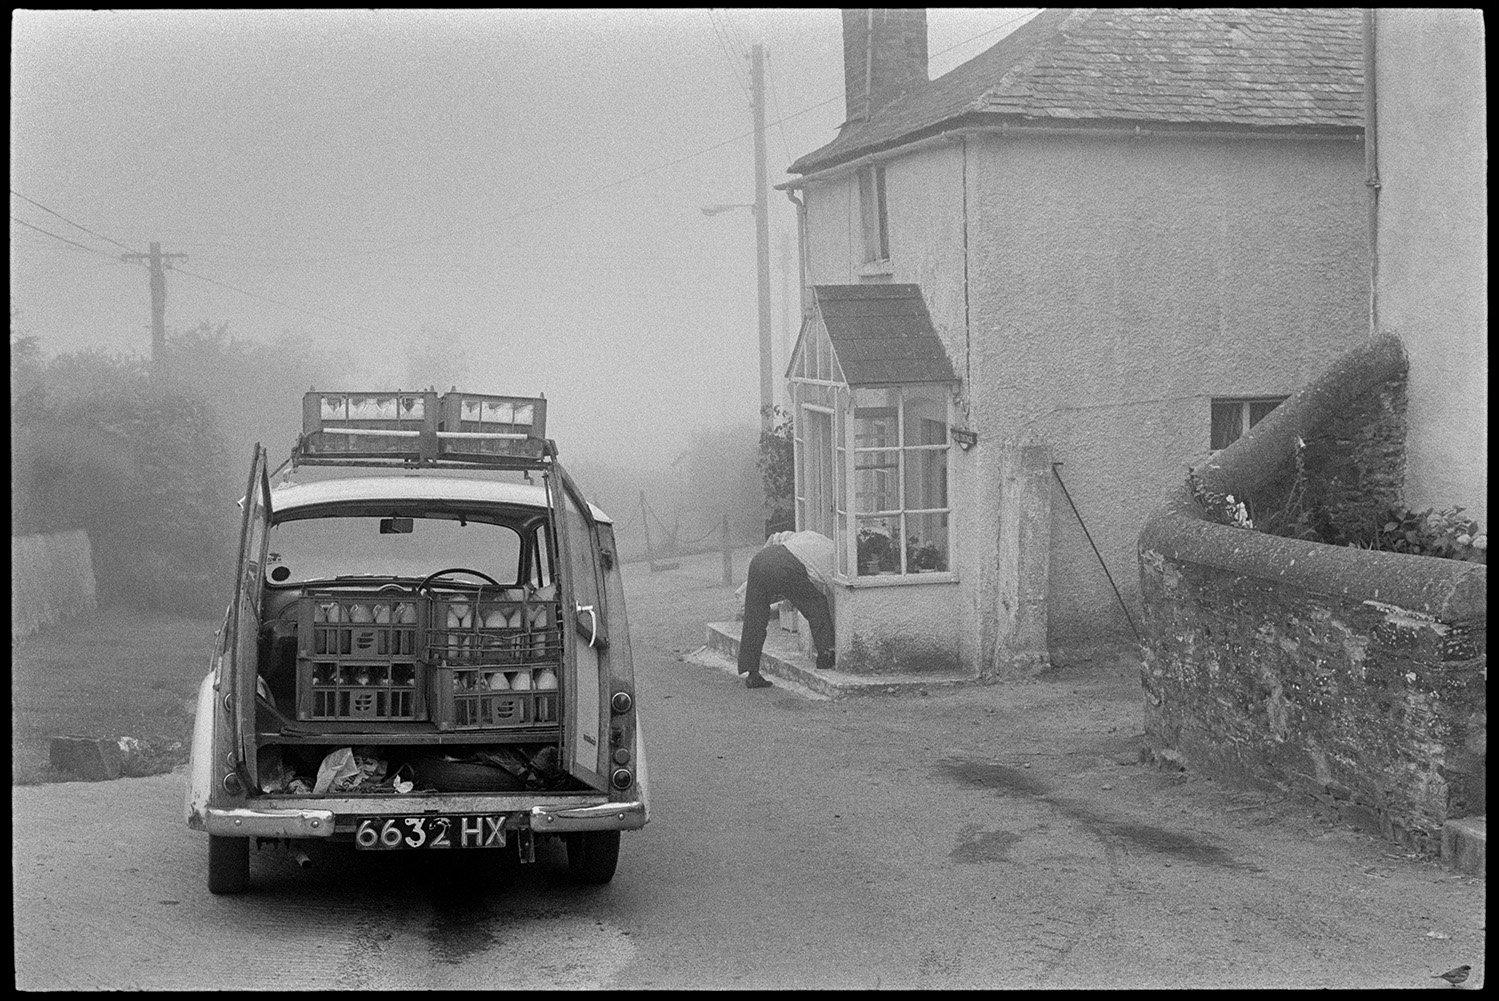 Man and woman delivering milk in village from back of van, car. 
[Sid Hiscock delivering milk bottles to Rose Cottage in West Lane, Dolton, on a misty morning. His van with crates of milk bottles is parked outside the cottage.]